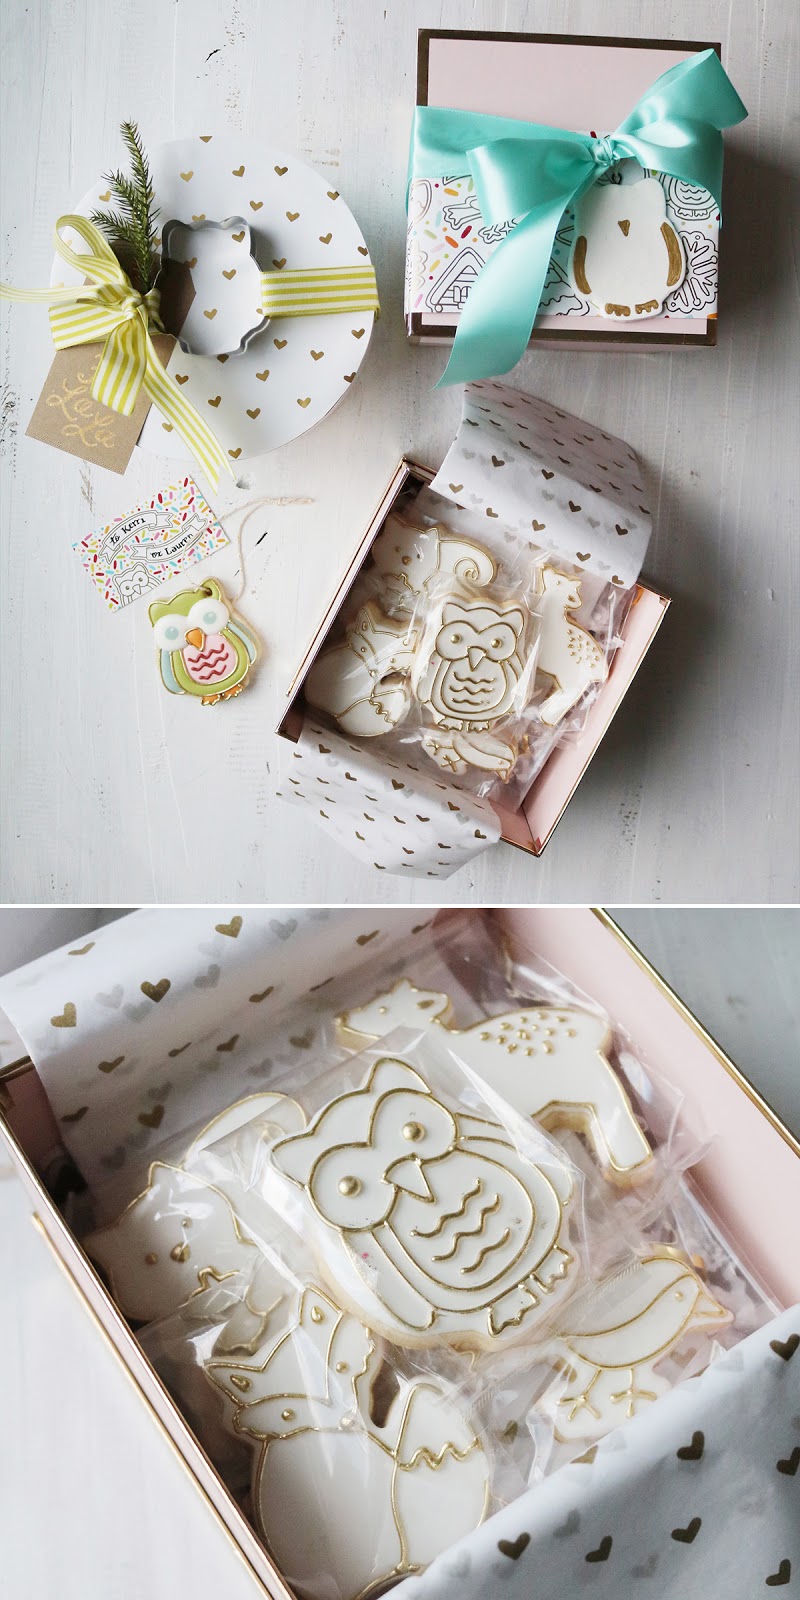 making the holidays sweet with the Sweet Life Collection | creativebag.com